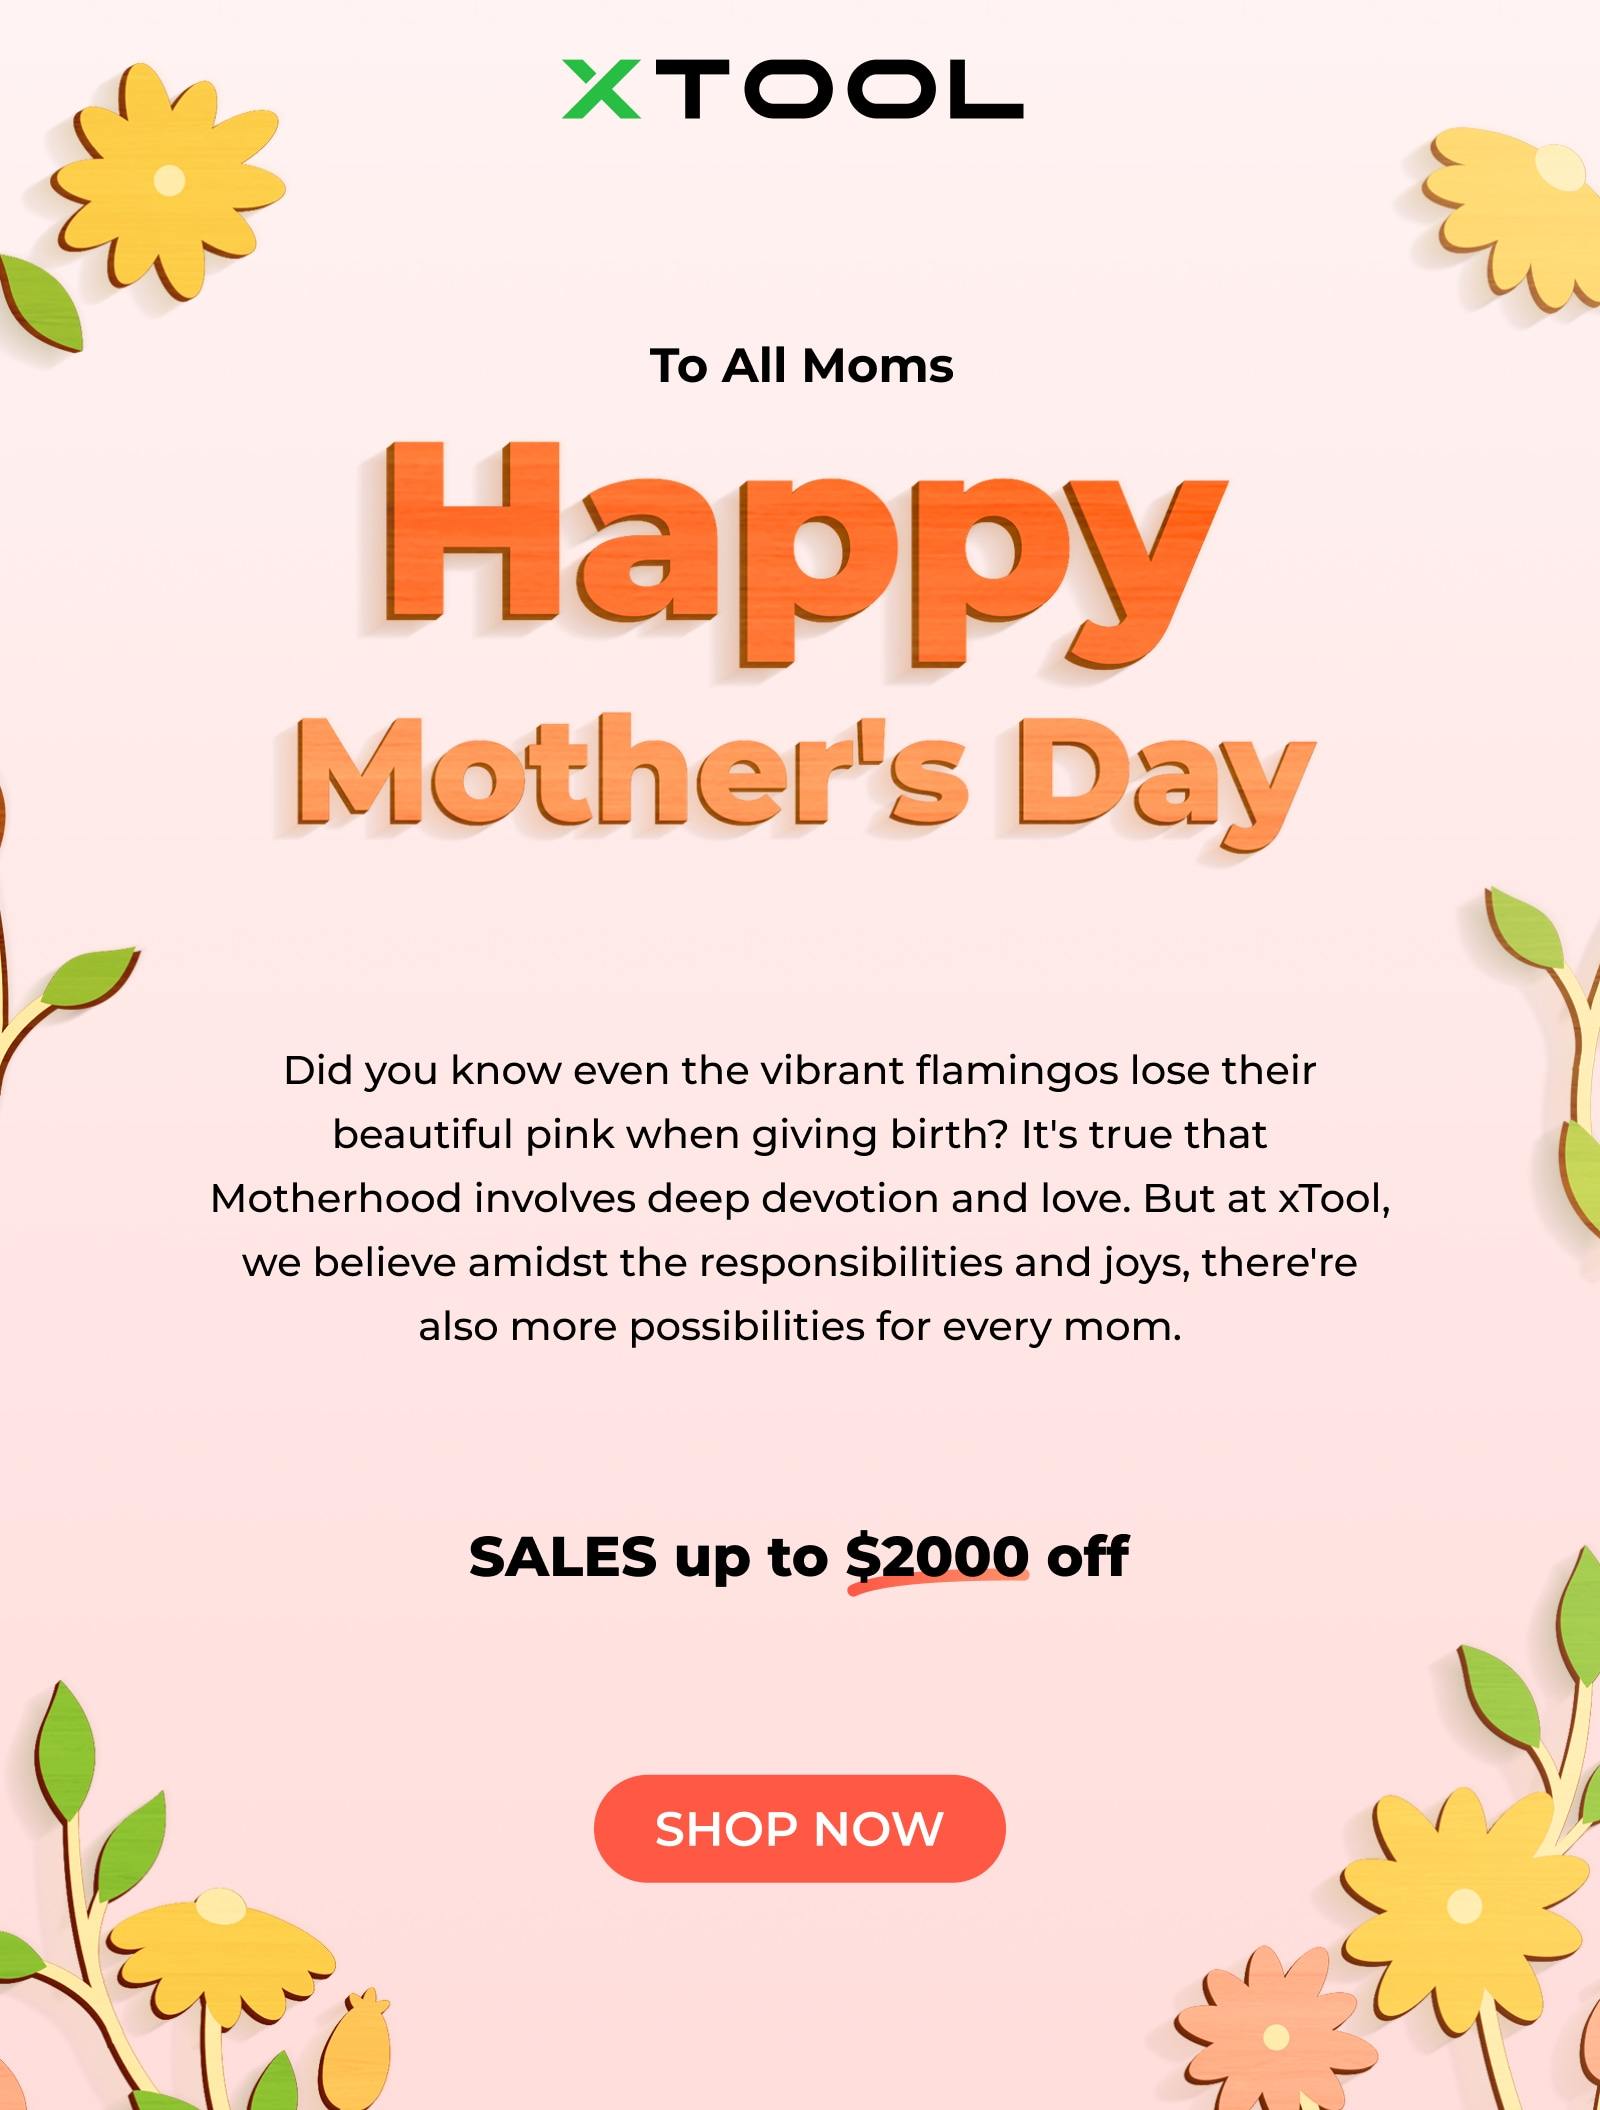 Mother's Day Sale: Gift Her More